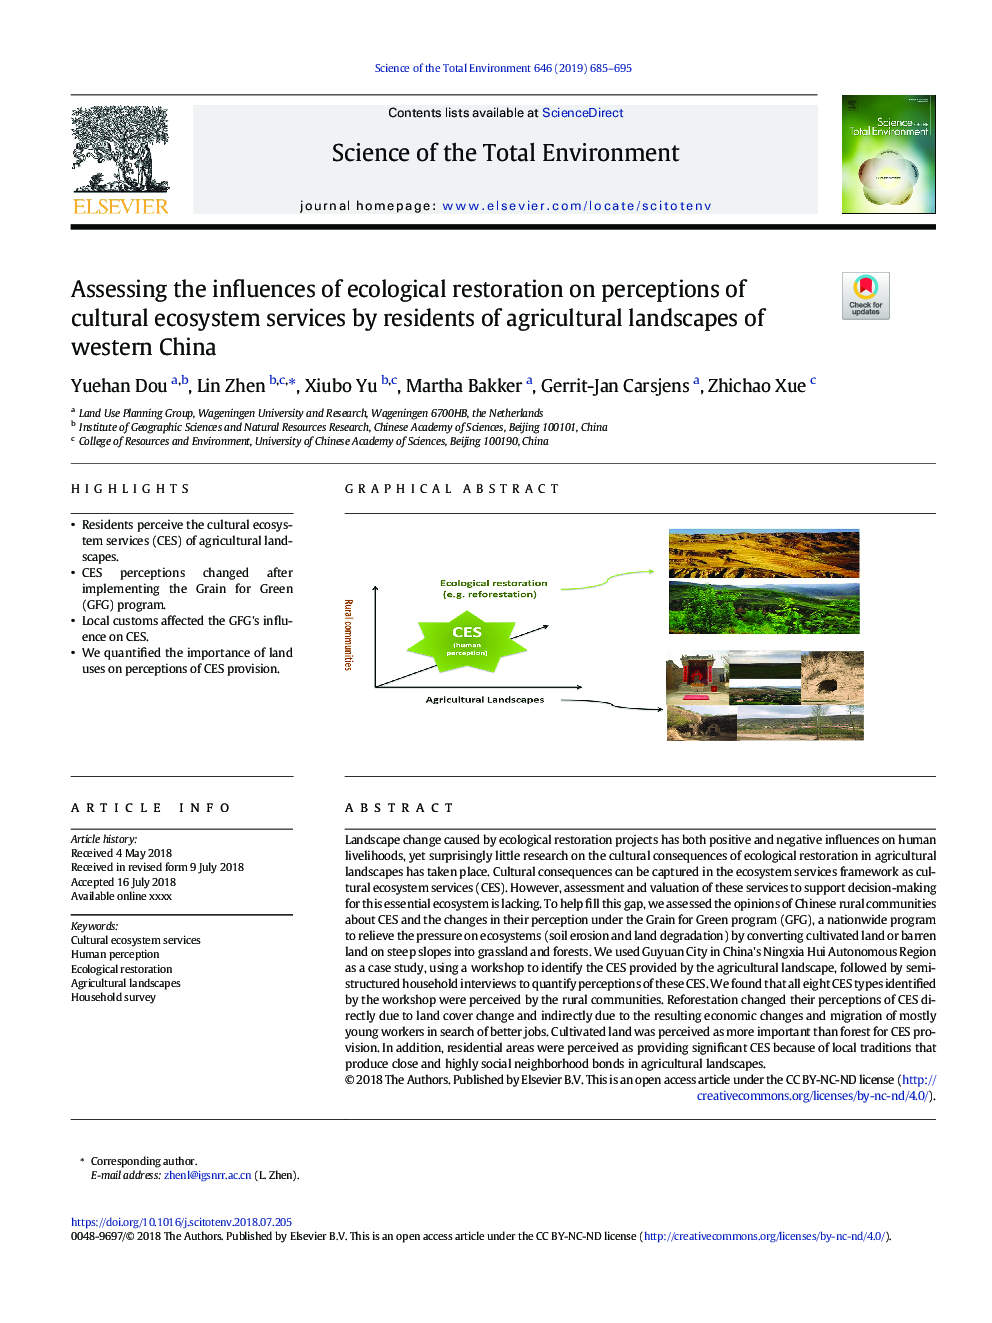 Assessing the influences of ecological restoration on perceptions of cultural ecosystem services by residents of agricultural landscapes of western China